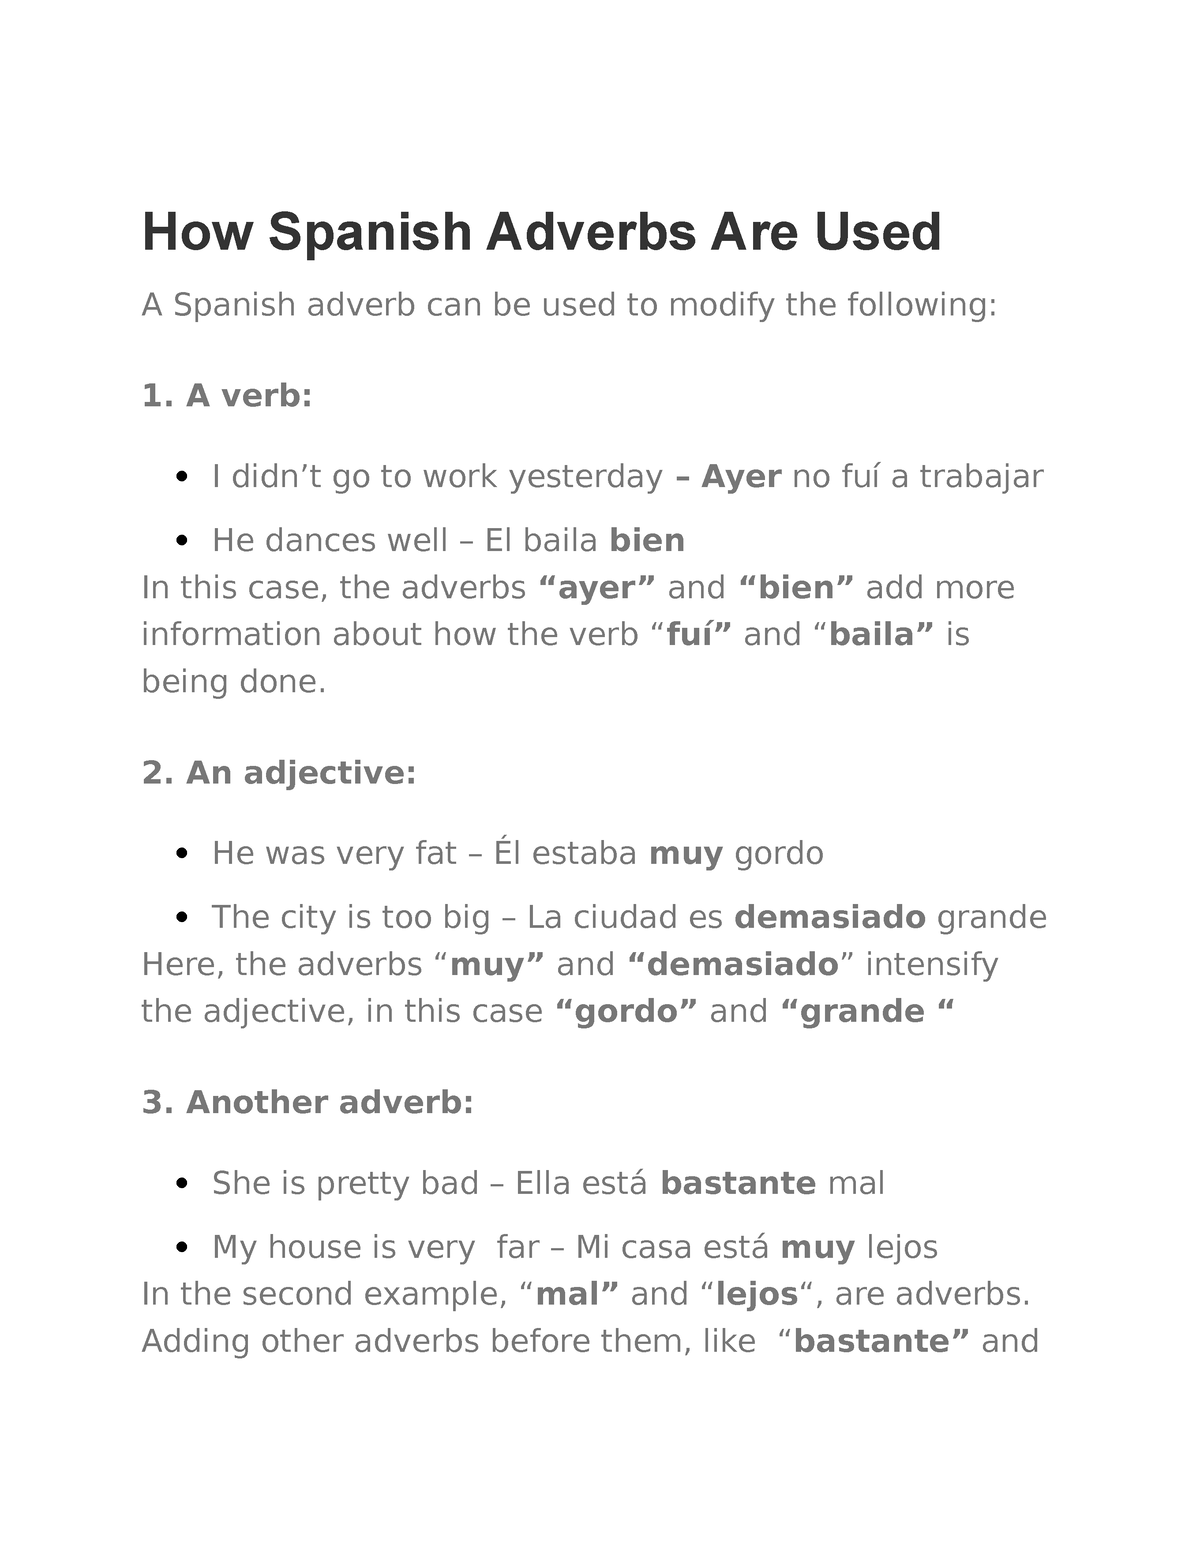 how-spanish-adverbs-are-used-a-verb-i-didn-t-go-to-work-yesterday